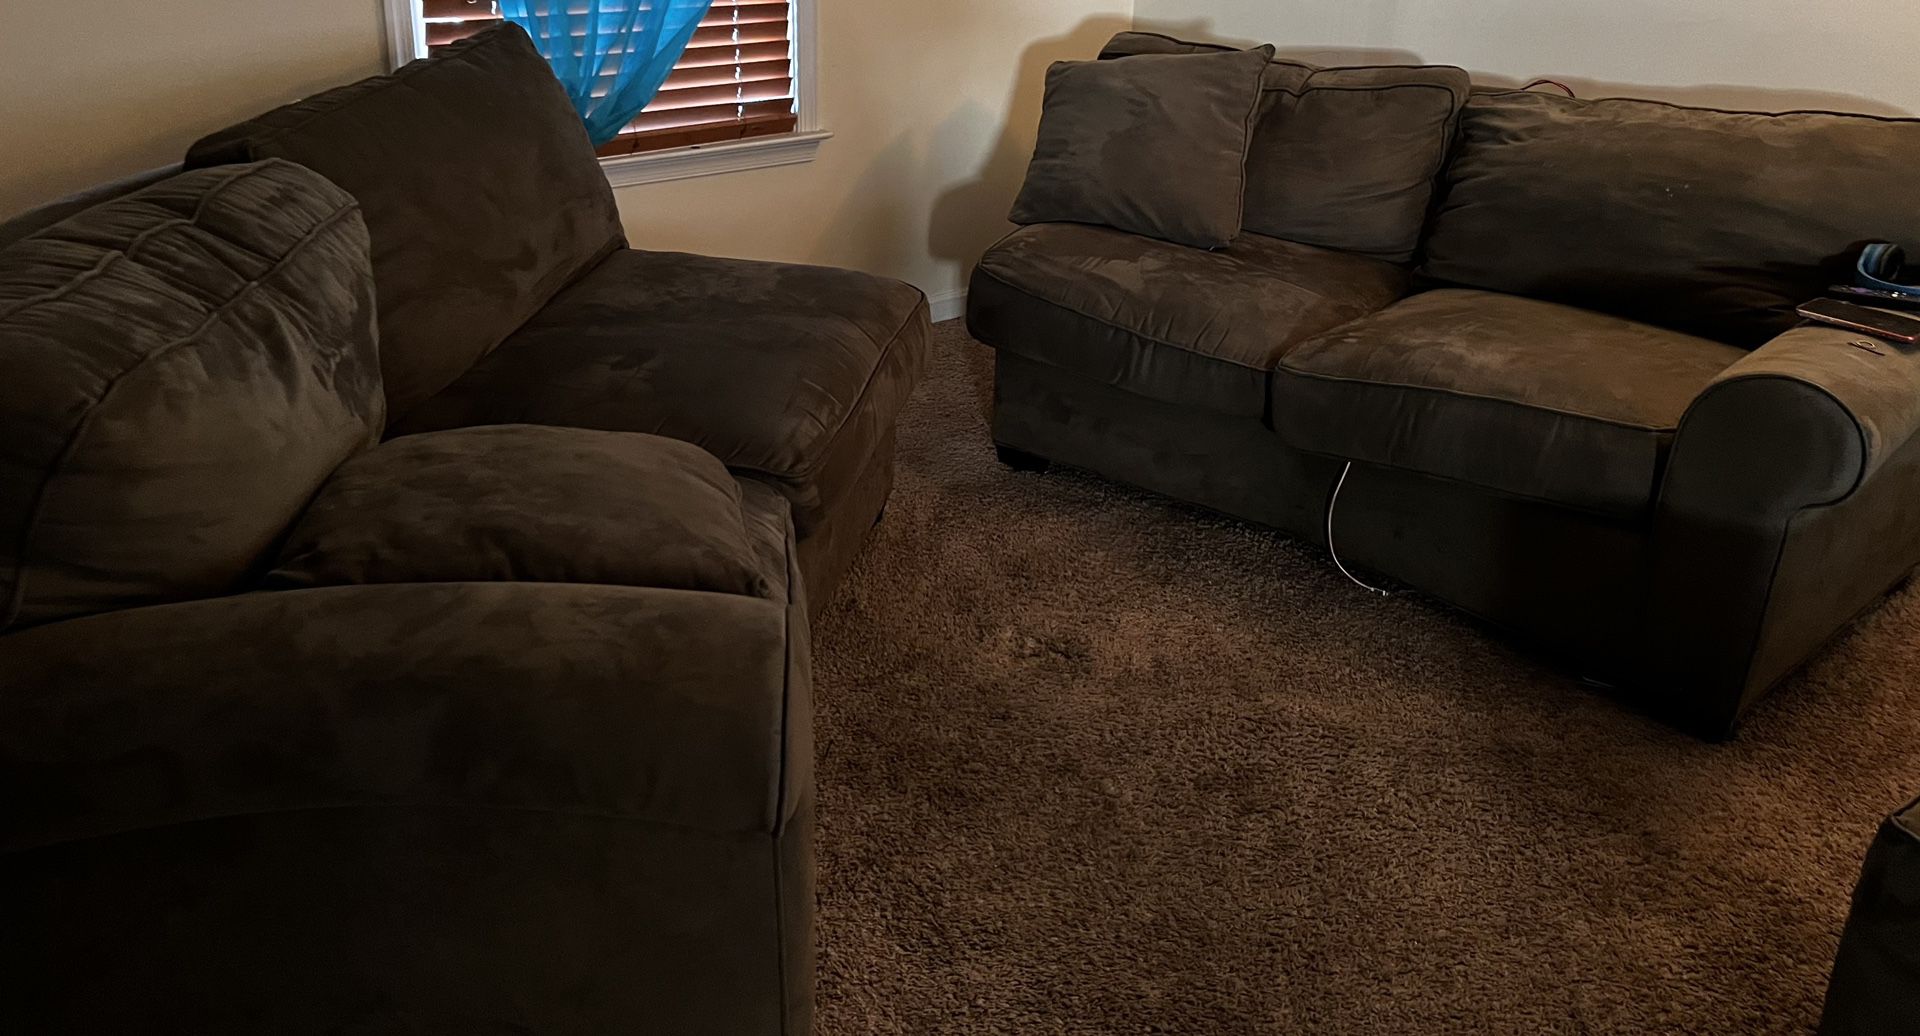 2 Piece Sectional With Ottoman 